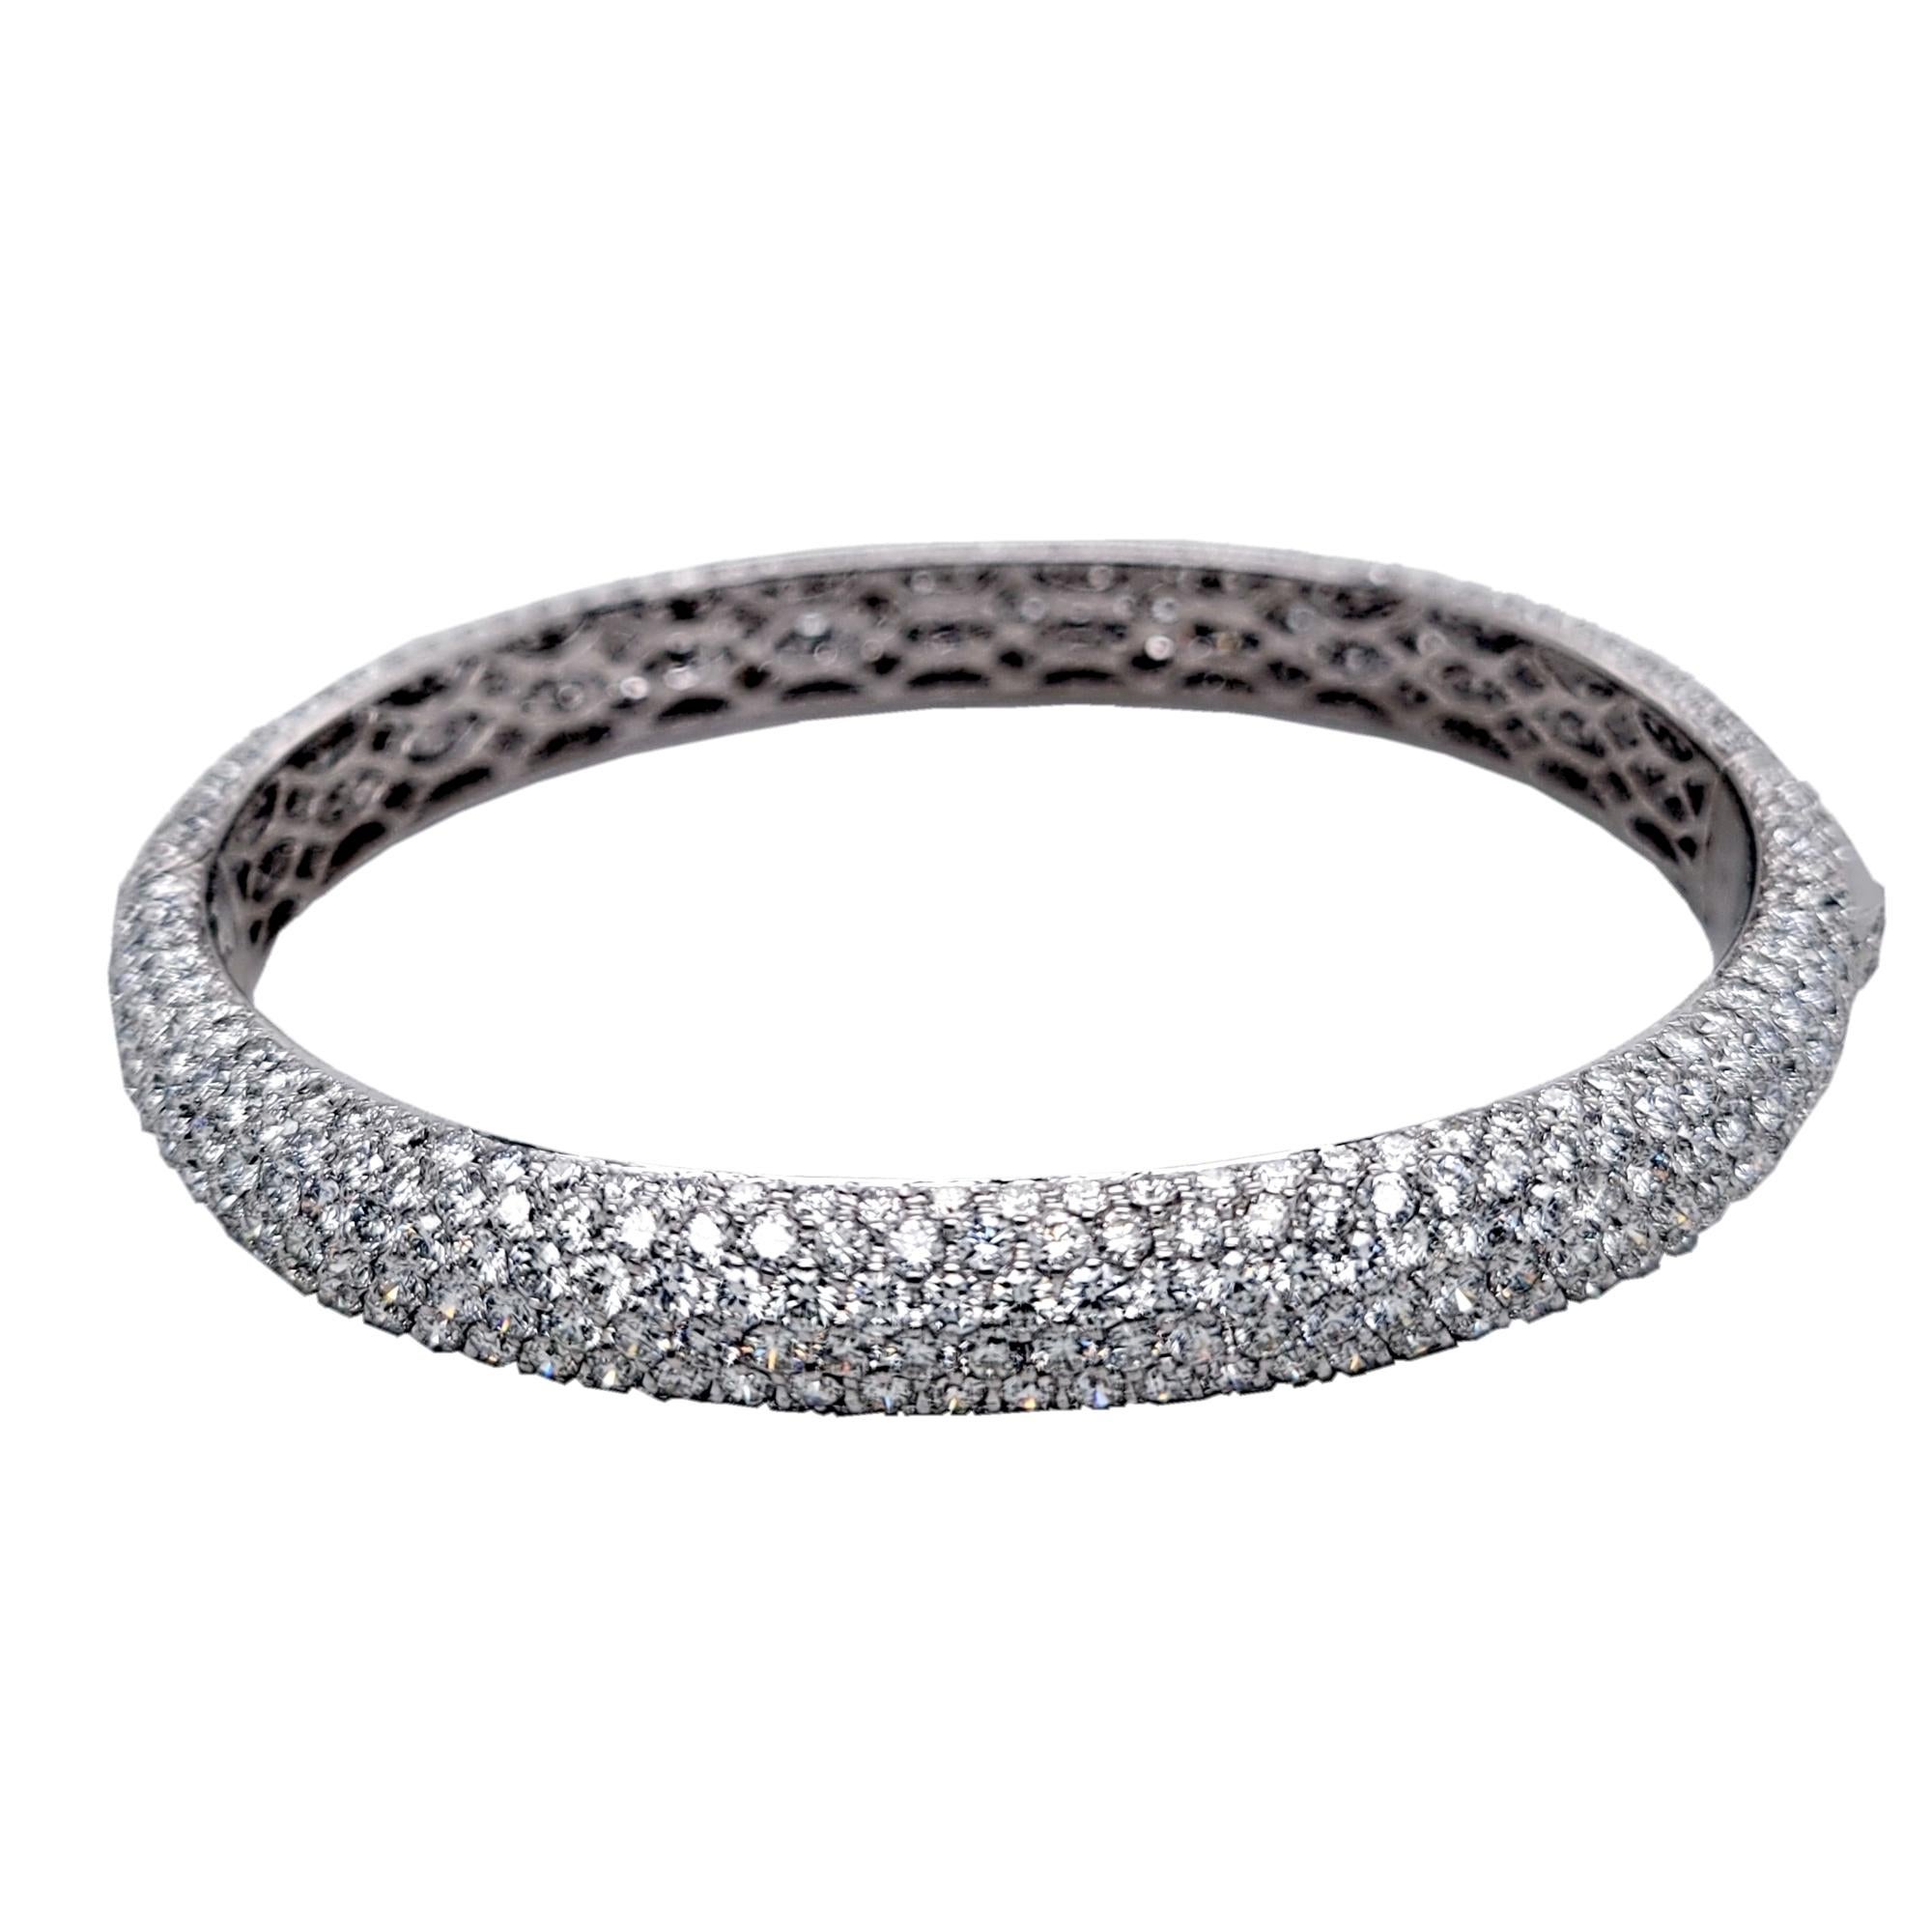 18.07 Ct 7 Row Pave Set Oval Shaped Hinged Bangle Bracelet In New Condition For Sale In Los Angeles, CA